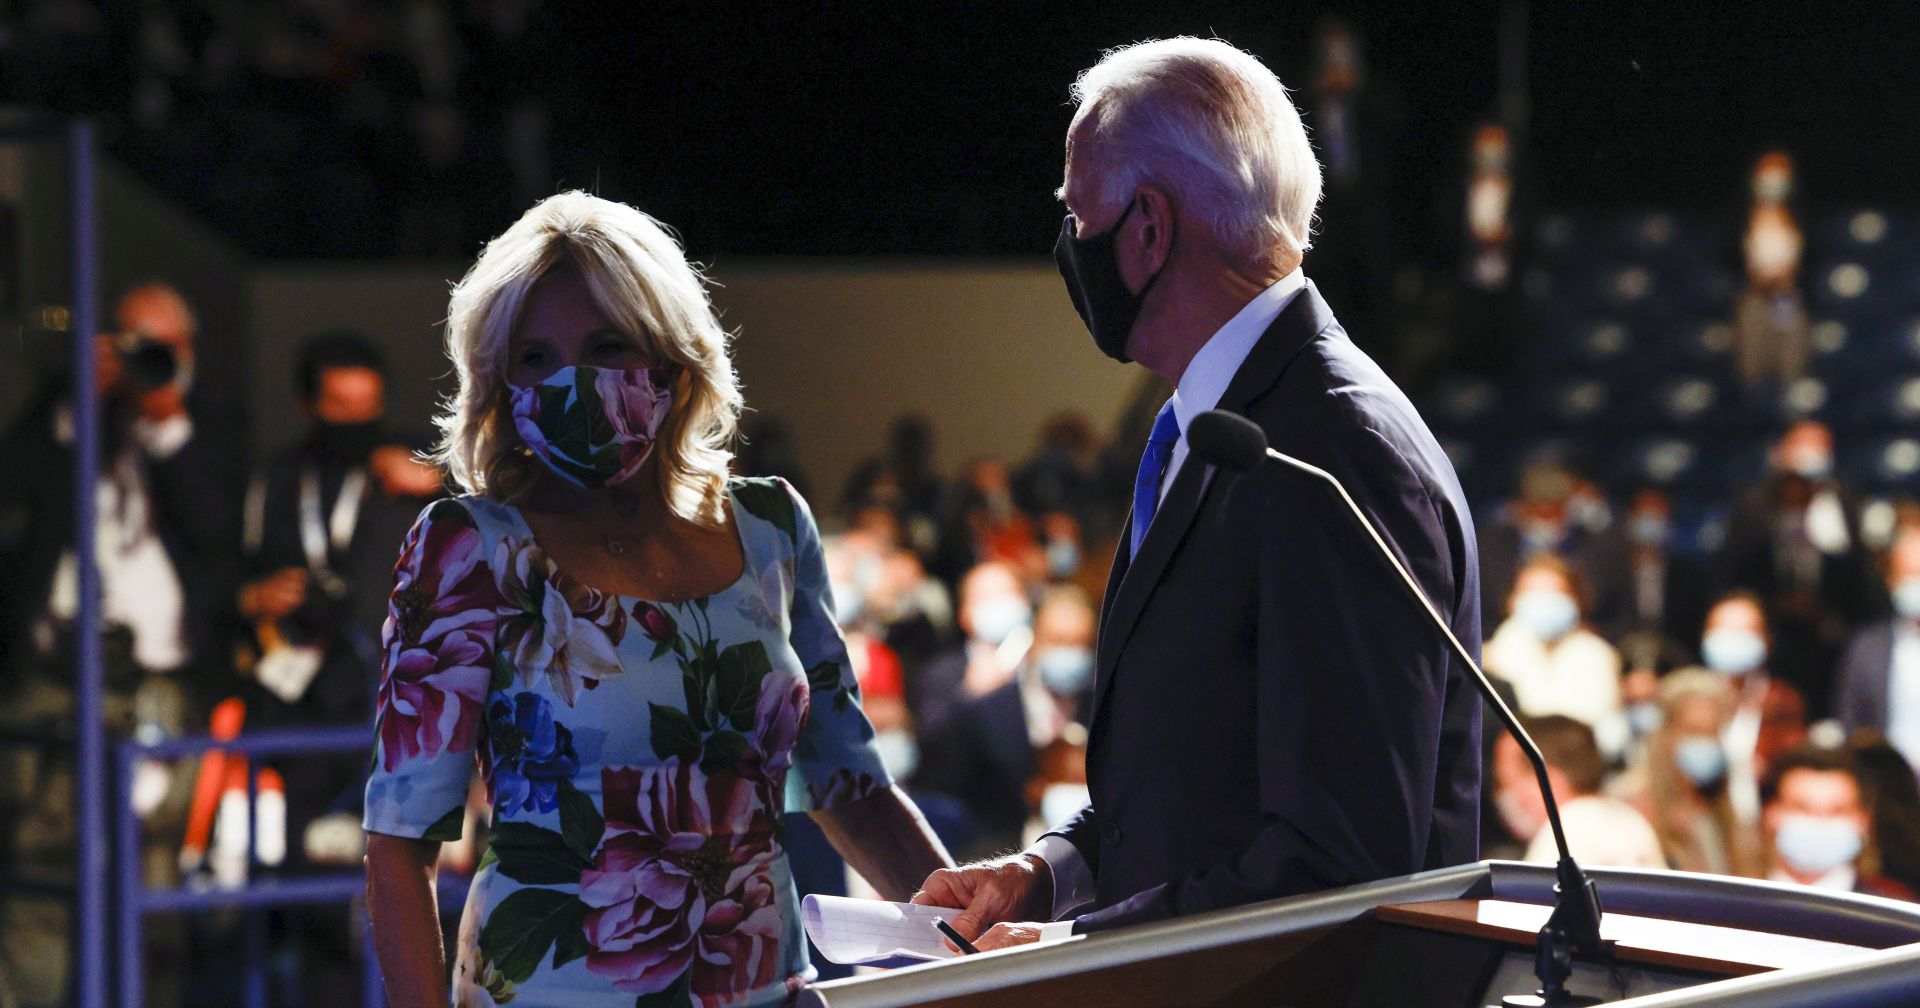 epa08766830 Democratic presidential candidate Joe Biden (R) is greeted by his wife, Dr. Jill Biden (L) after the final presidential debate at Belmont University in Nashville, Tennessee, USA, 22 October 2020. This was the last debate between the US President Donald Trump and Democratic presidential nominee Joe Biden before the upcoming presidential election on 03 November.  EPA/JIM BOURG / POOL